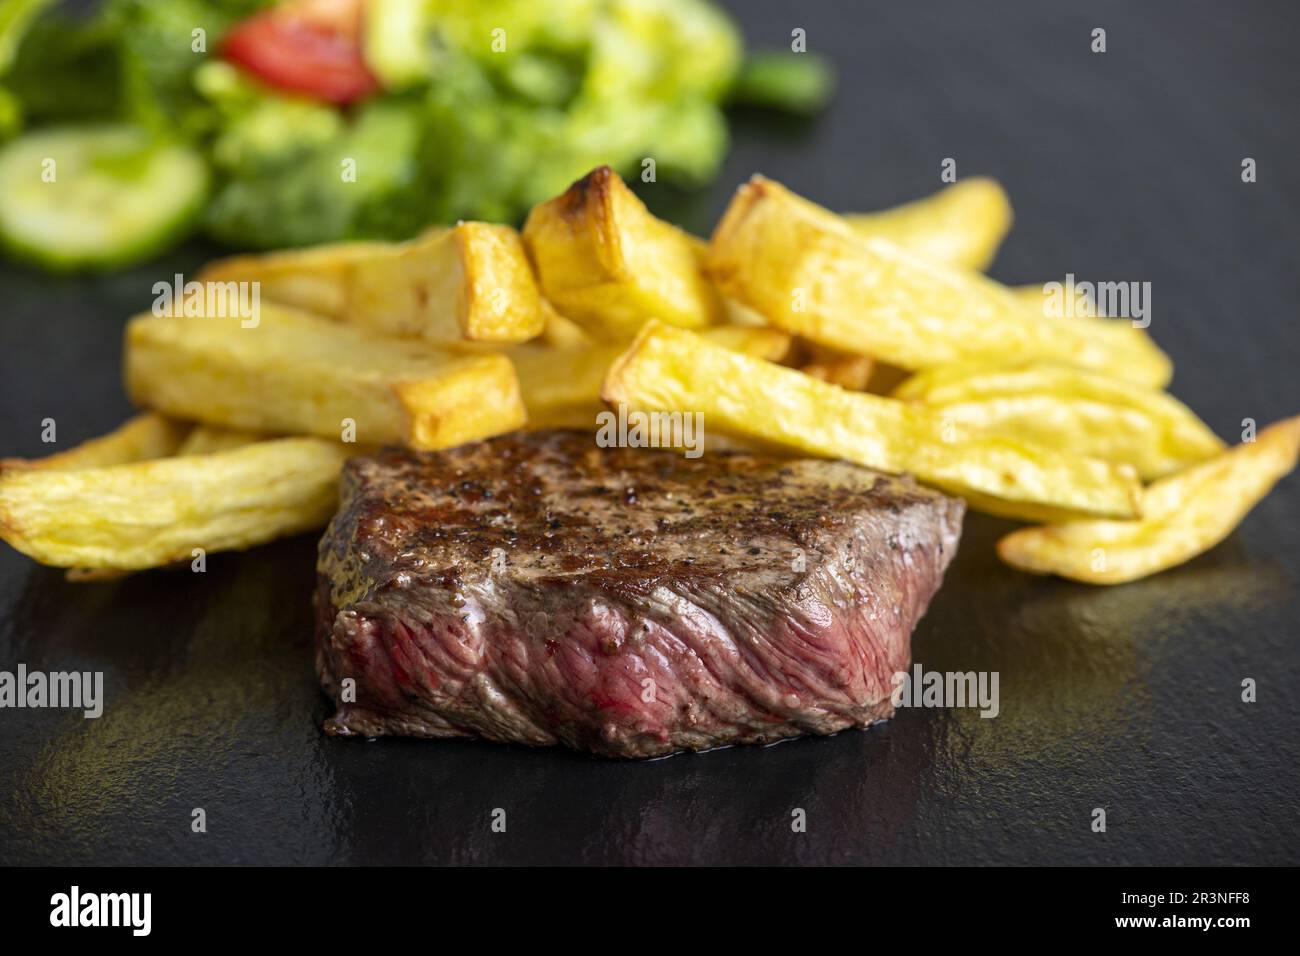 Steak with fries on slate Stock Photo